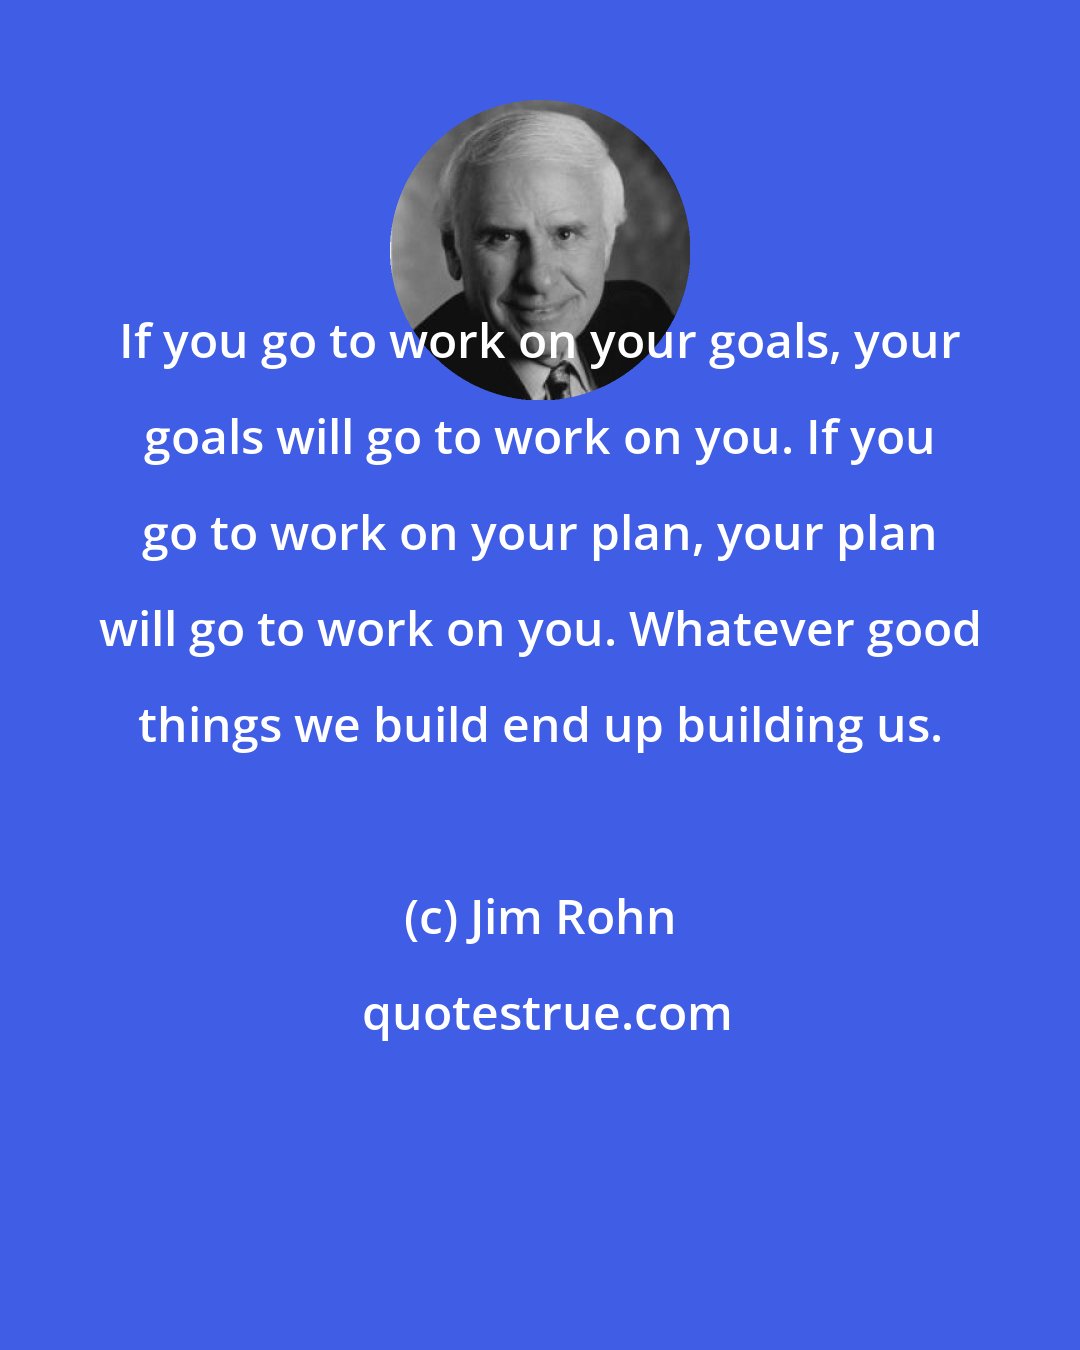 Jim Rohn: If you go to work on your goals, your goals will go to work on you. If you go to work on your plan, your plan will go to work on you. Whatever good things we build end up building us.